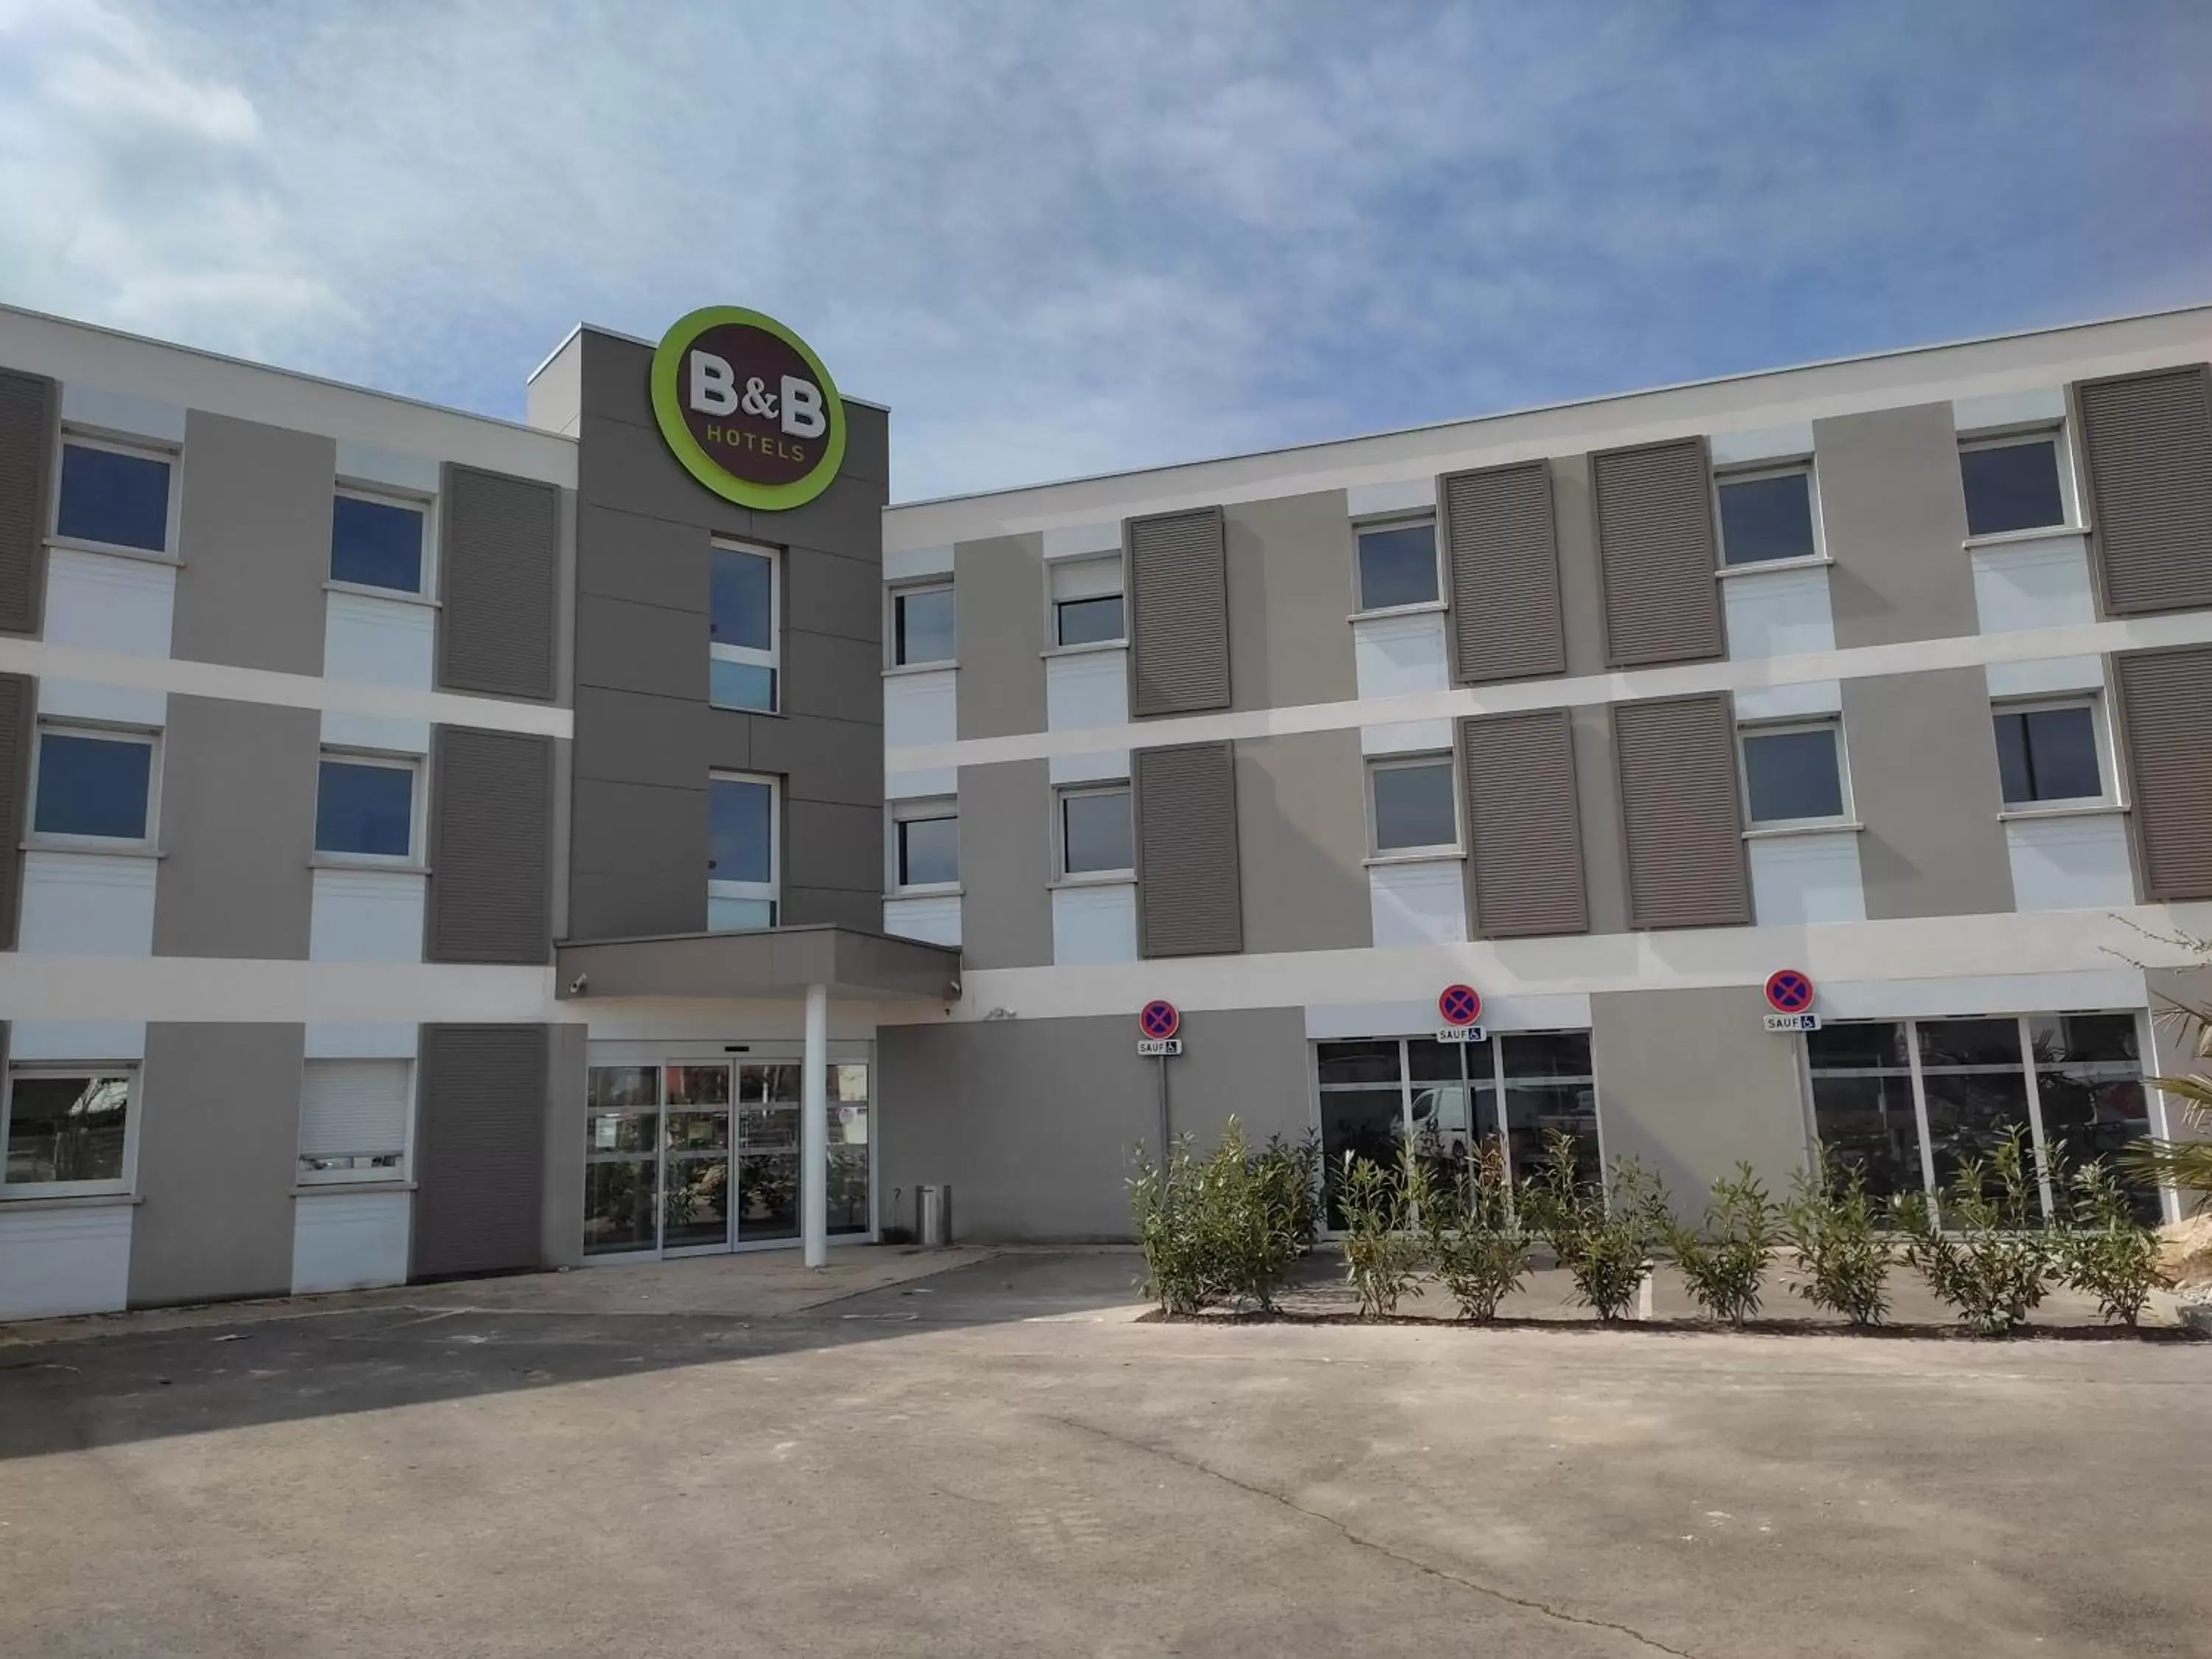 Property Building in B&B HOTEL Romilly-sur-Seine